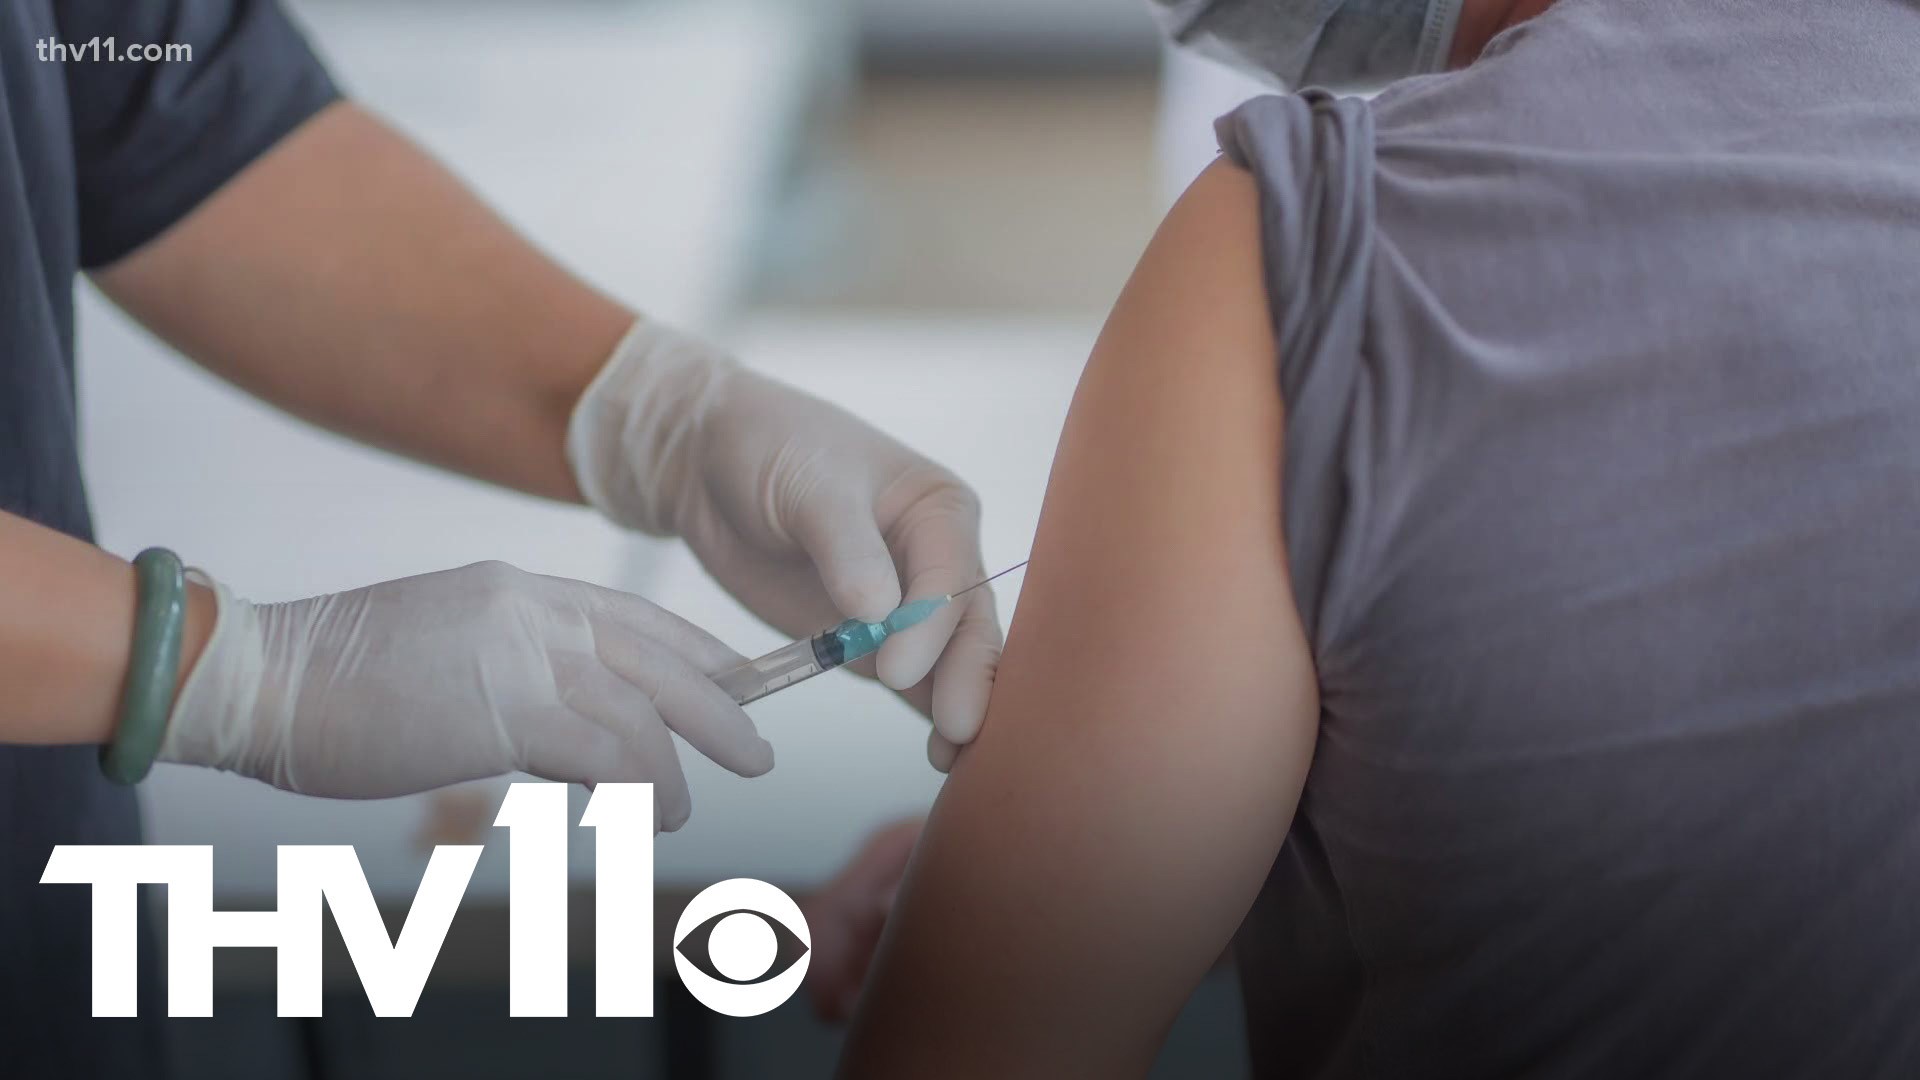 Gov. Hutchinson announced during his weekly COVID briefing that all Arkansans over the age of 16 are now eligible to receive the vaccine.